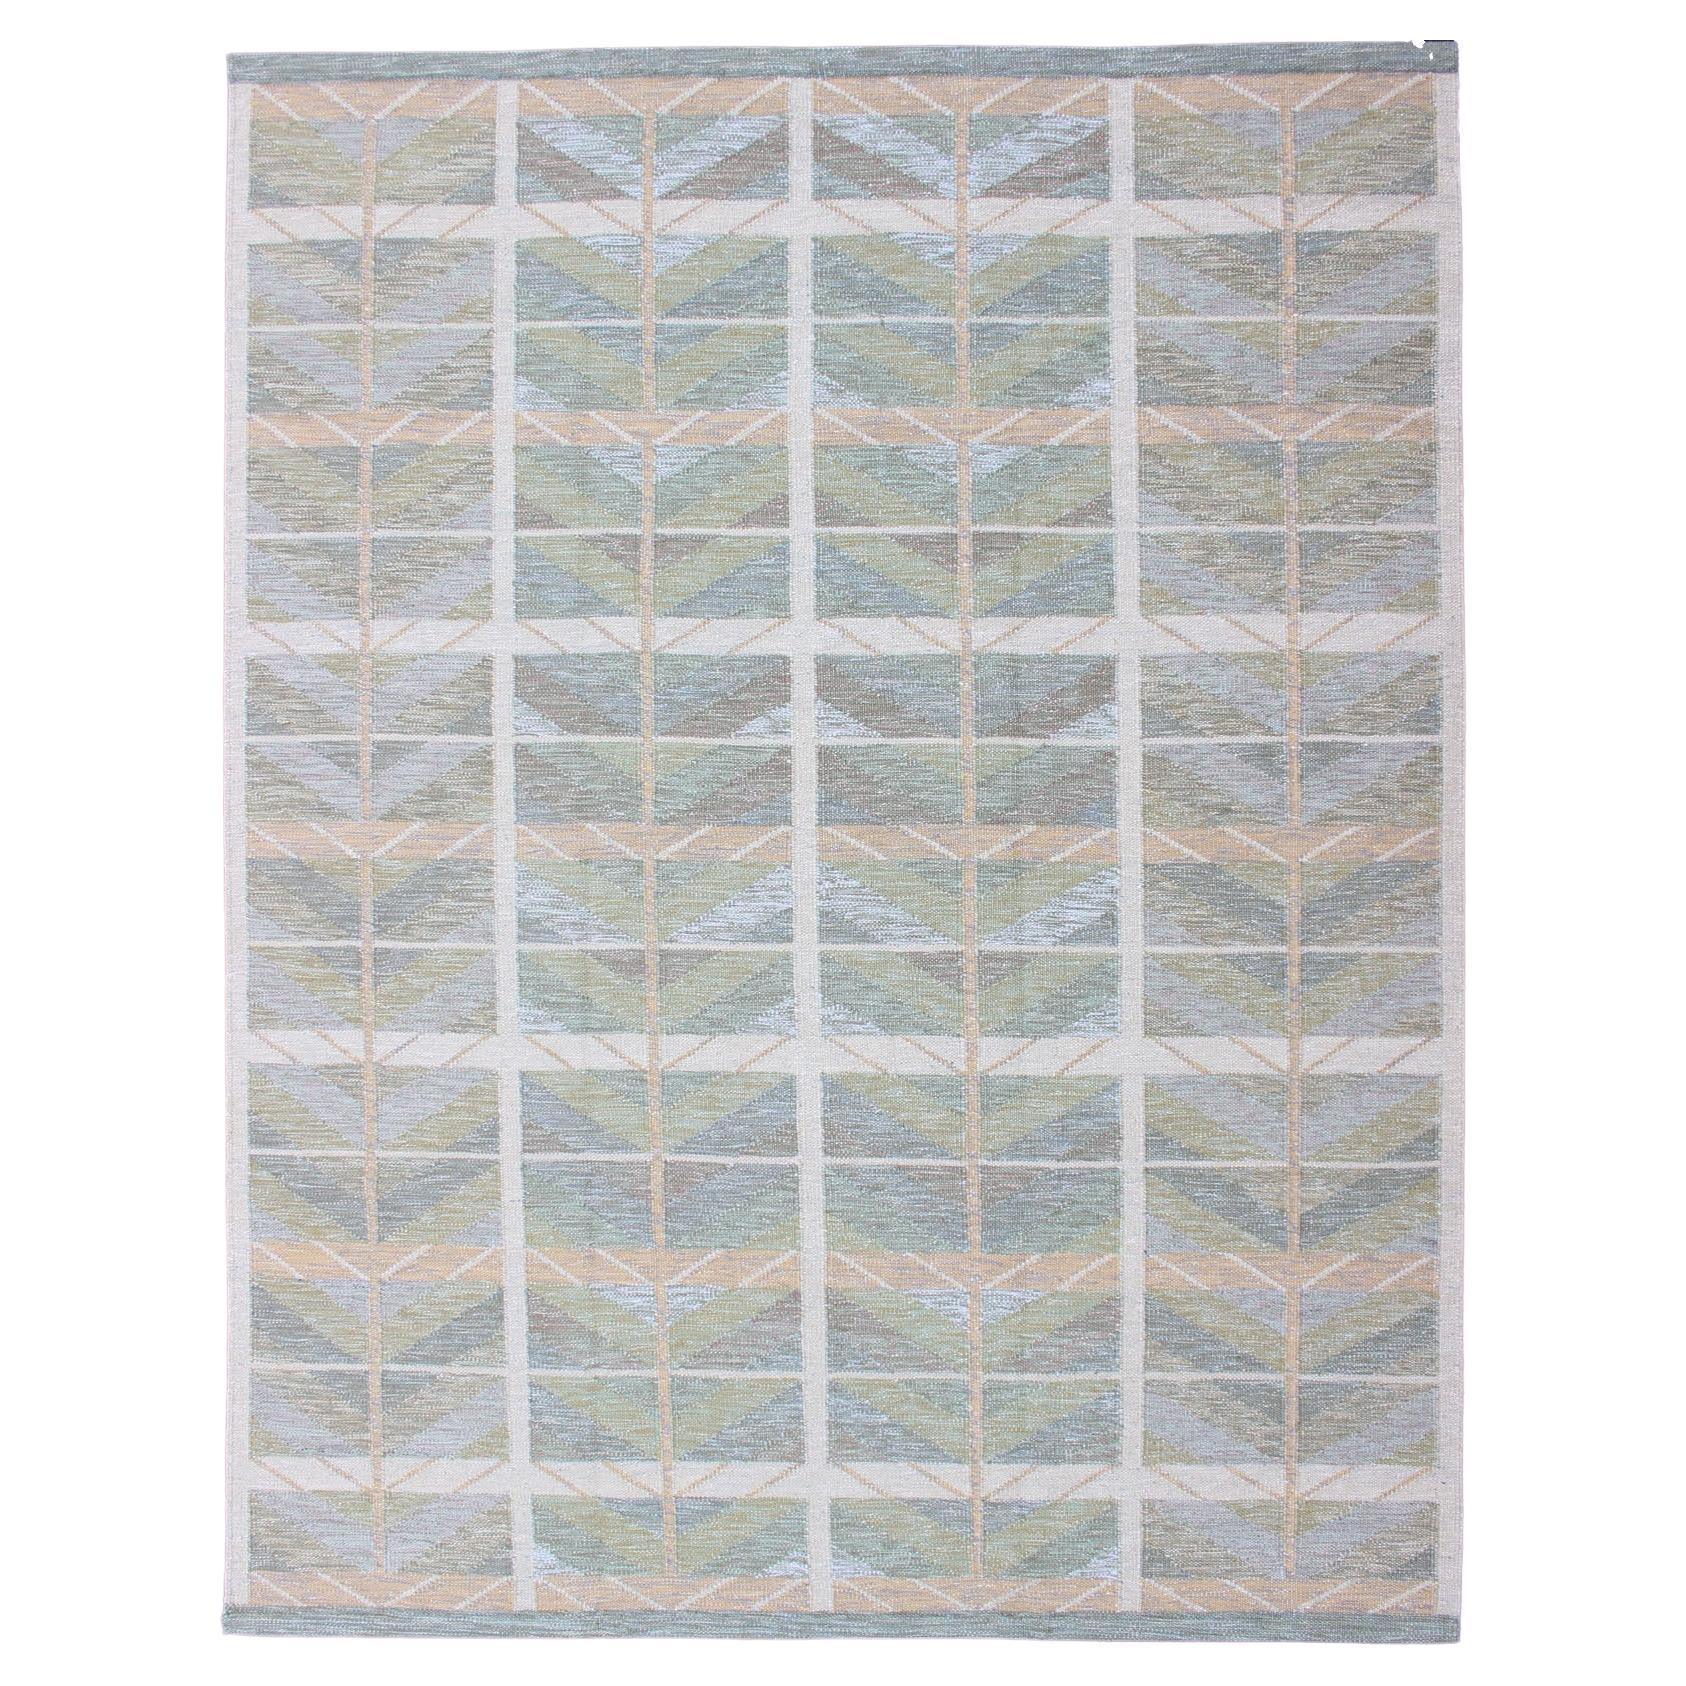 Keivan Woven Arts Scandinavian Flat-Weave Design Rug with Green, Gray, and Peach For Sale